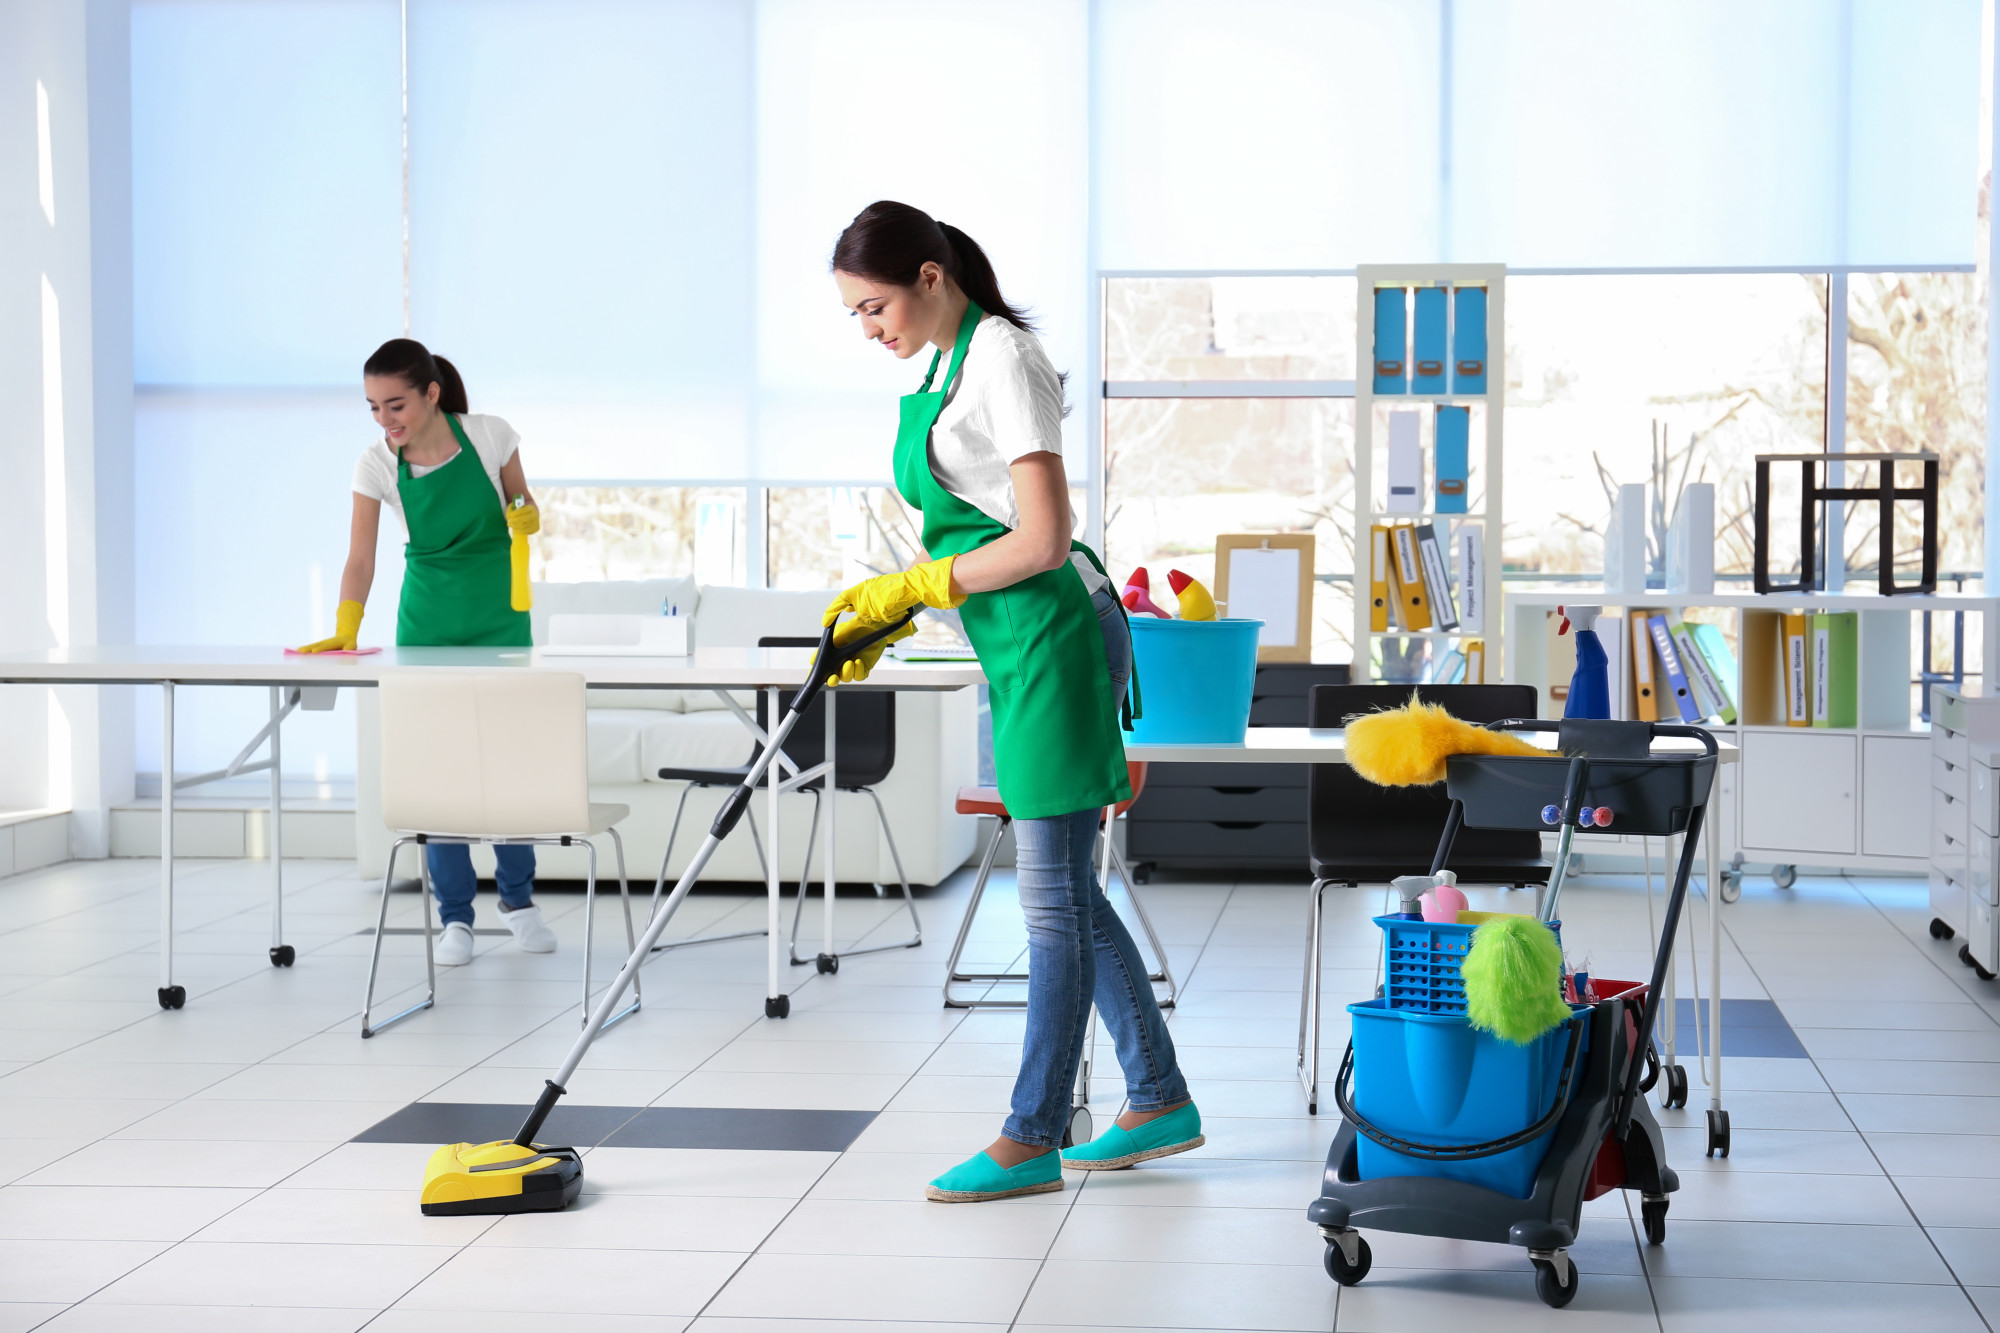 House cleaning company near me: Do you want to know how to choose the right cleaning company? Read on to learn how to make the right choice.